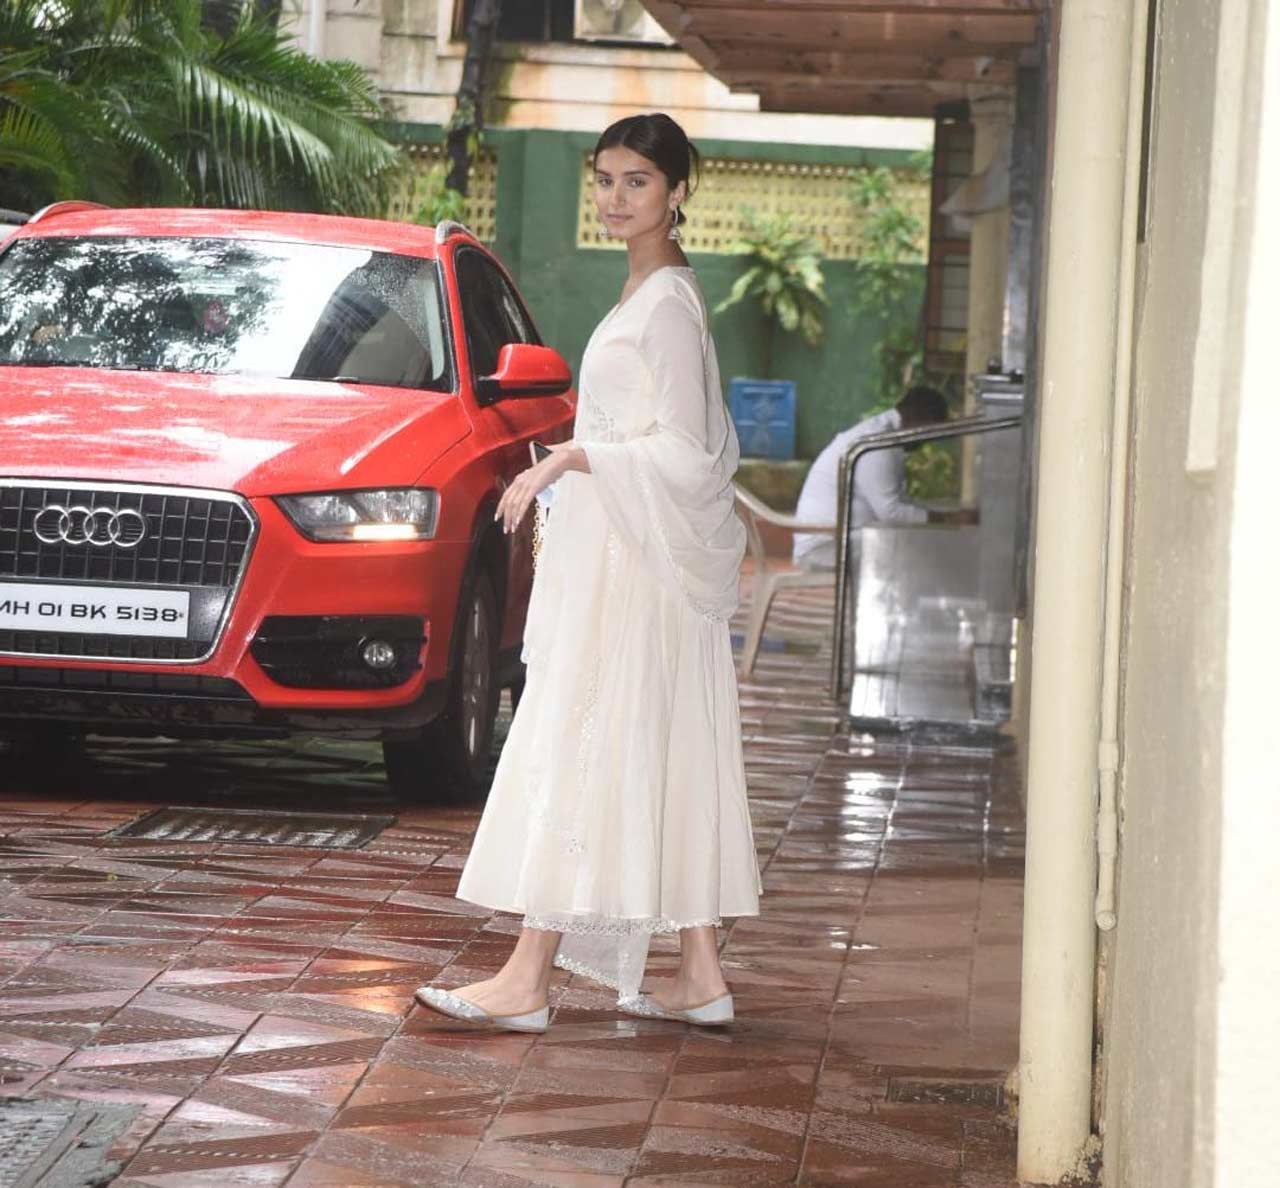 Tara Sutaria's latest outing was clearly a style statement to admire. The rumours of Tara Sutaria and Aadar Jain's relationship started doing the rounds when the duo was spotted multiple times on various occasions together. The couple confirmed their relationship after Tara joined Aadar's brother Armaan Jain's wedding.